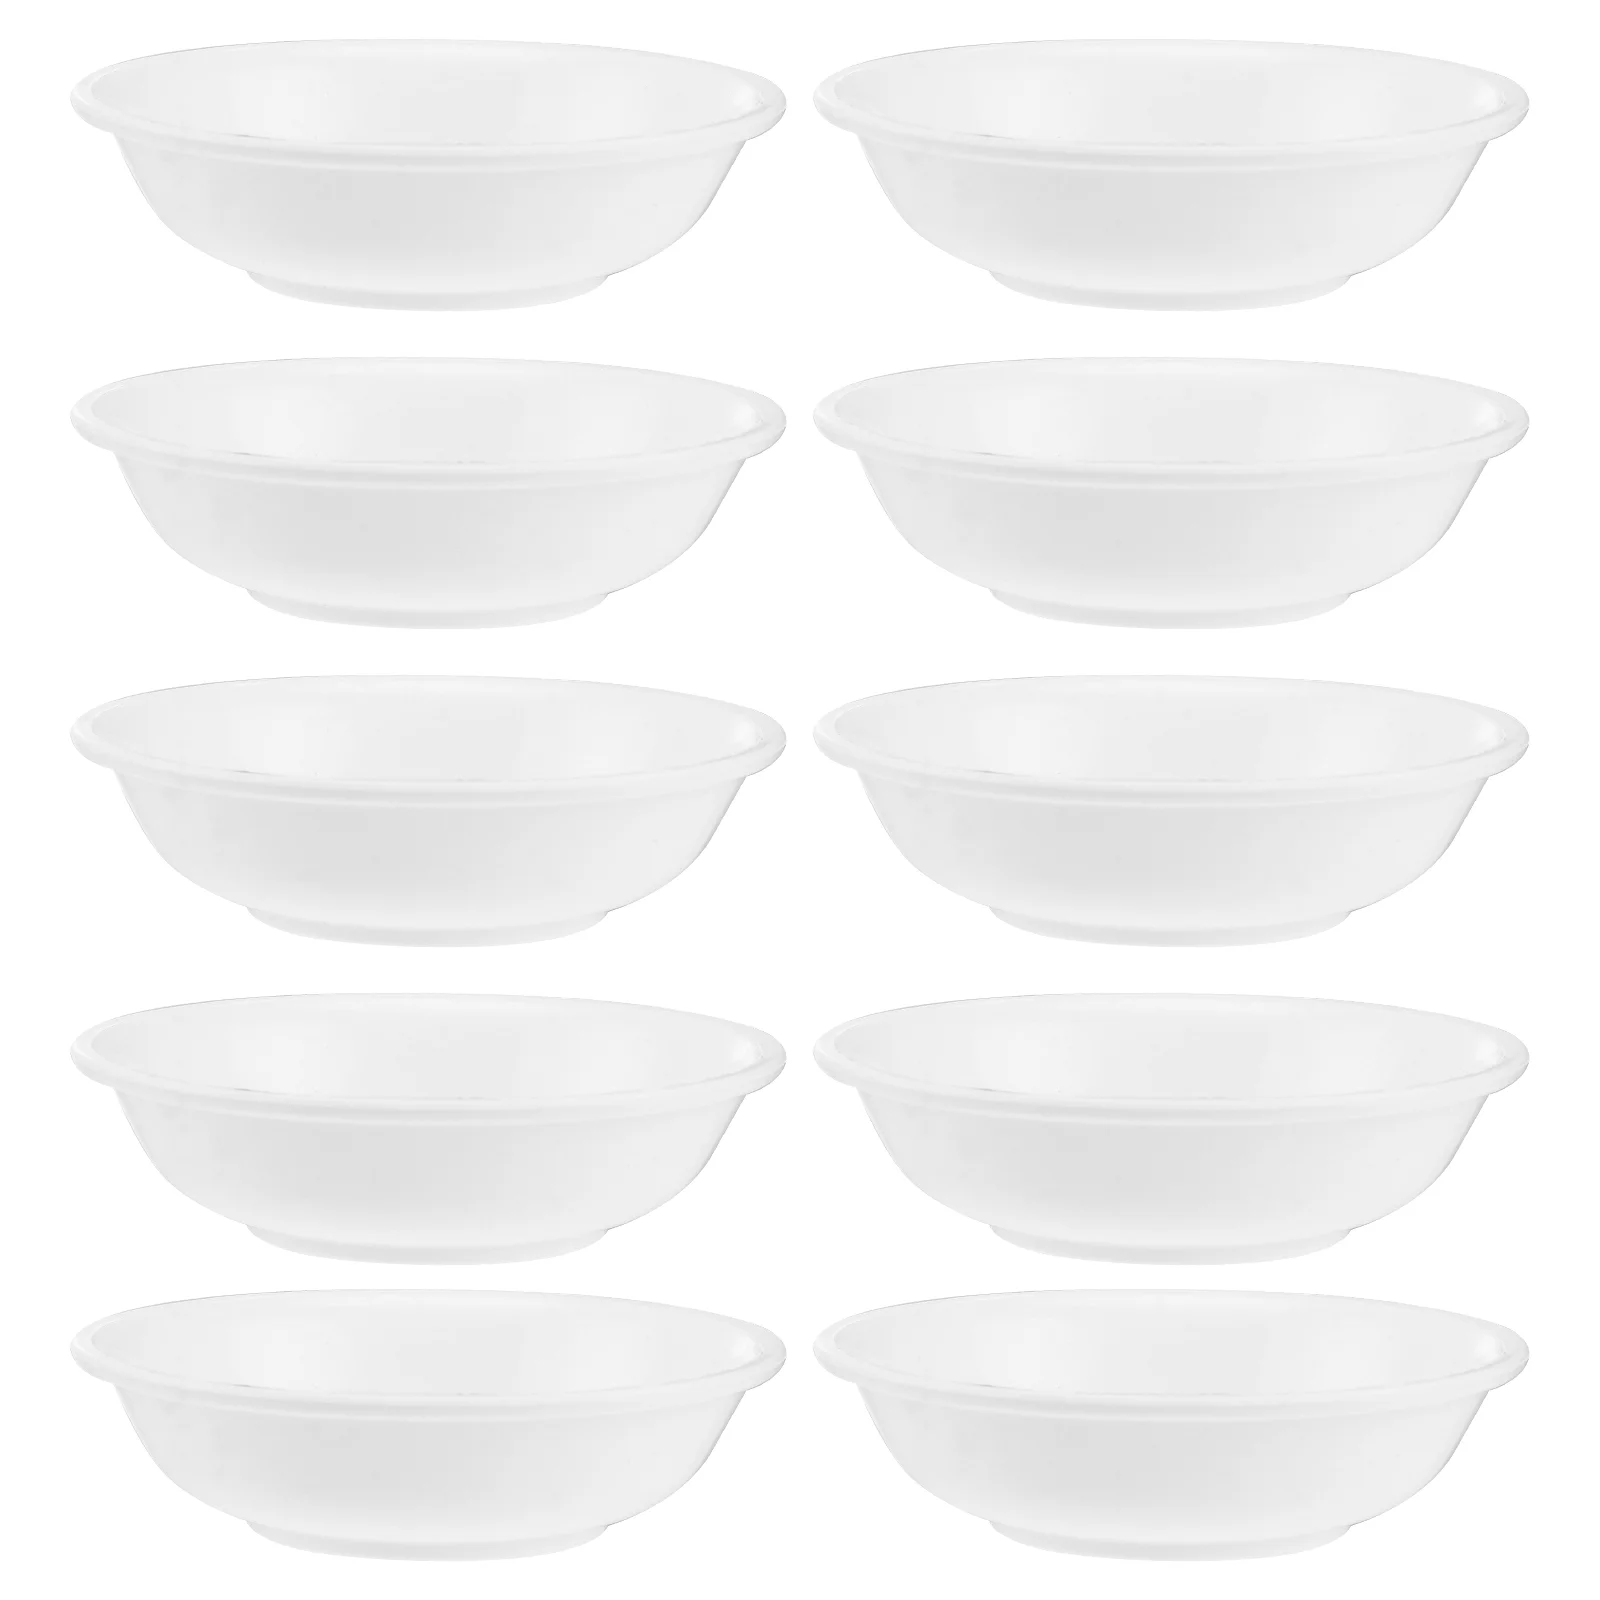 

Sauce Dish Bowls Dipping Bowl Dishes Plates Seasoning Appetizer Soy Mini Dip Sushi Condiment Cups Ketchup Plate Serving White